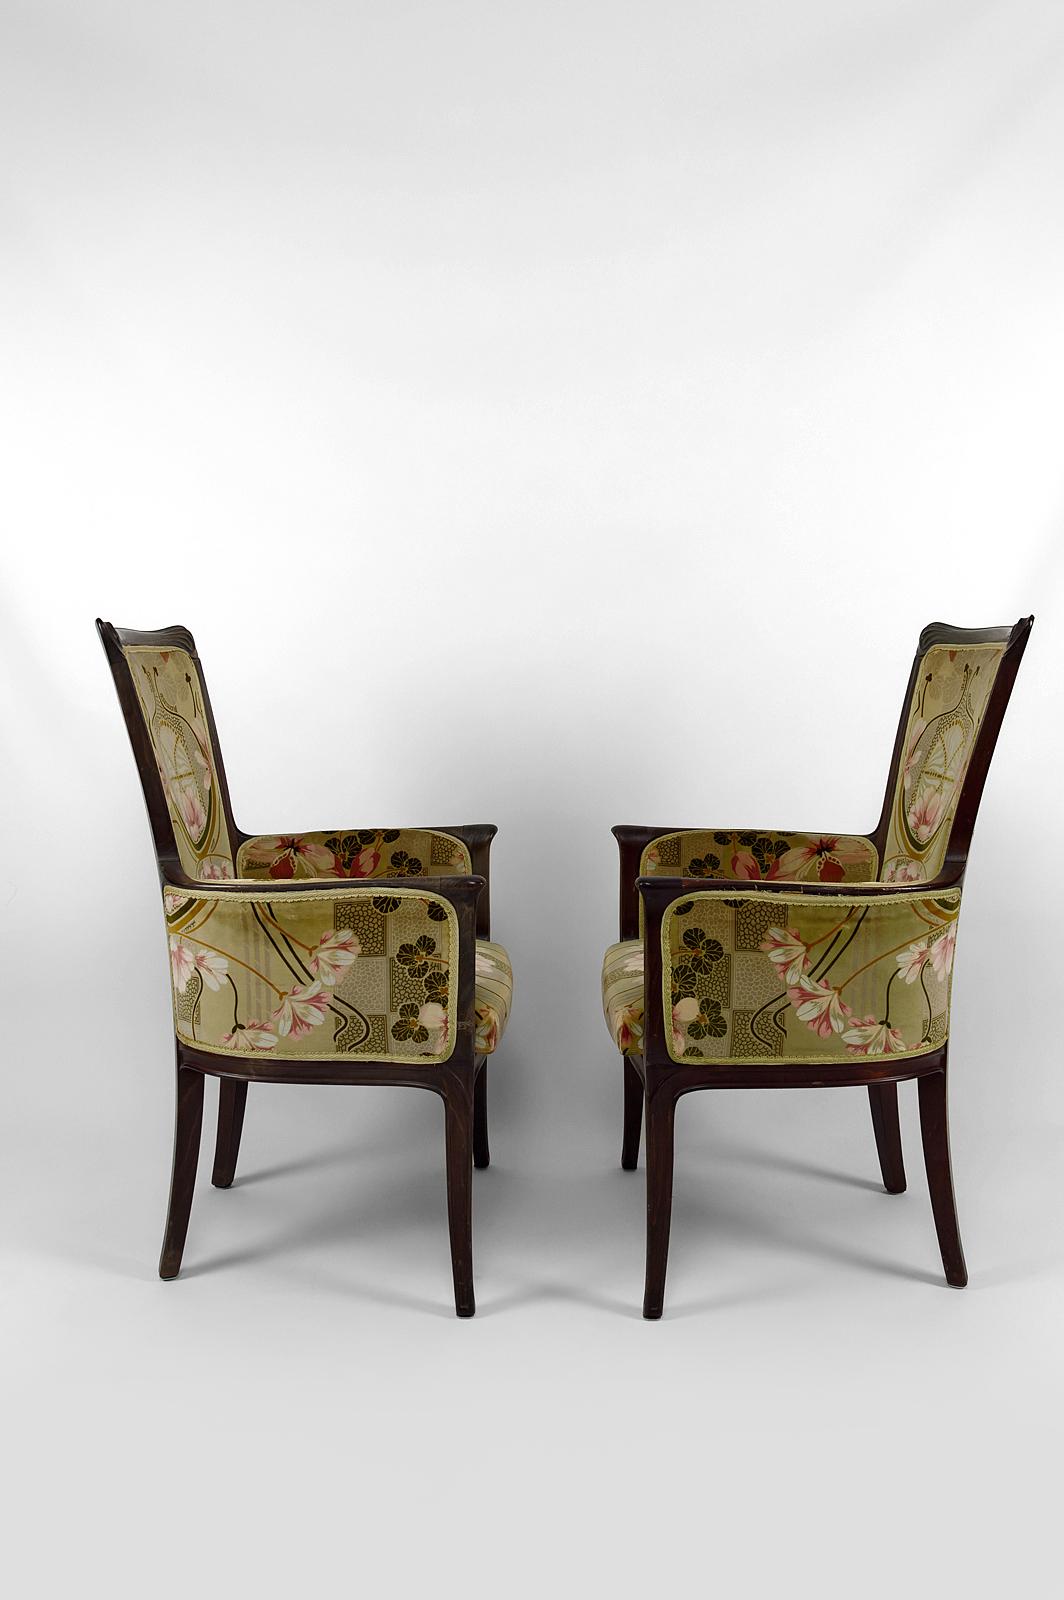 Early 20th Century Art Nouveau salon set of 3, 2 armchairs and 1 chair, France, Circa 1900 For Sale